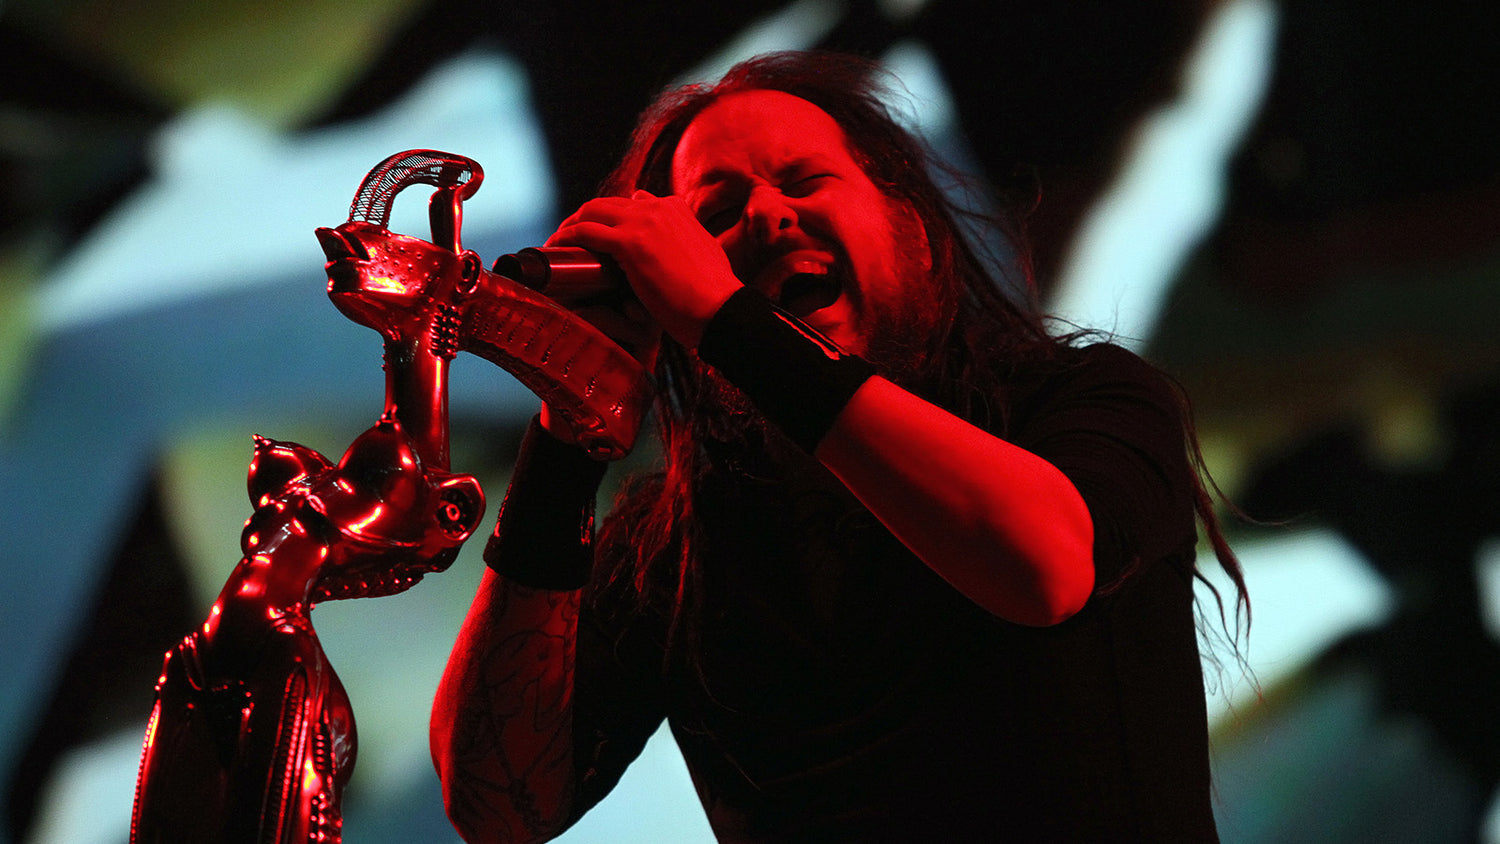 Korn's Requiem Tour is a Colossal and Rowdy Celebration